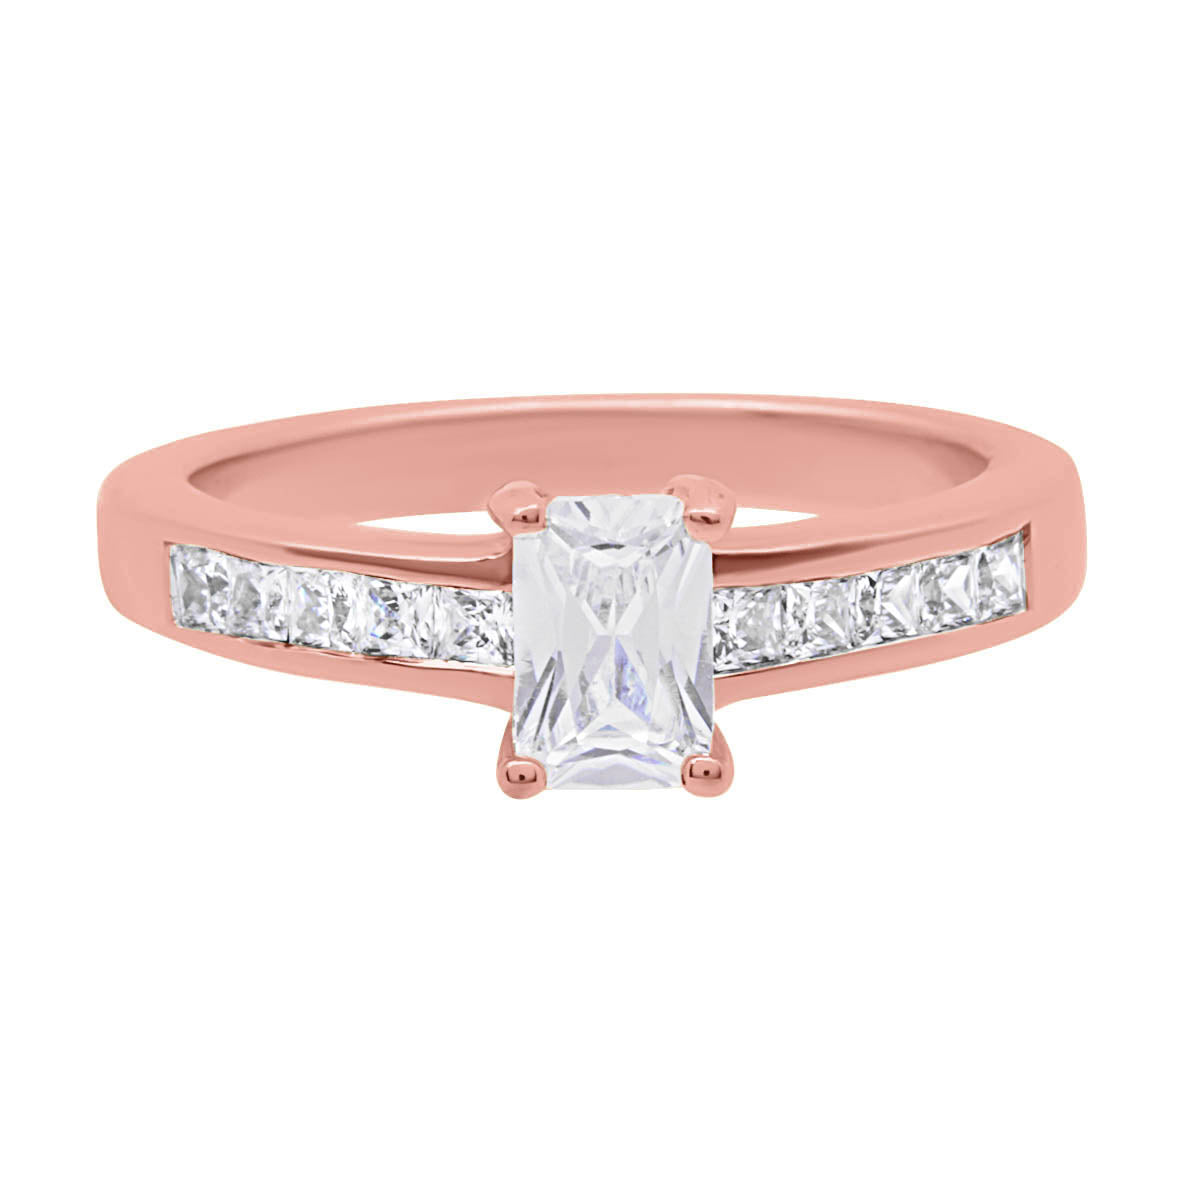 Radiant Cut Engagement Ring in rose gold